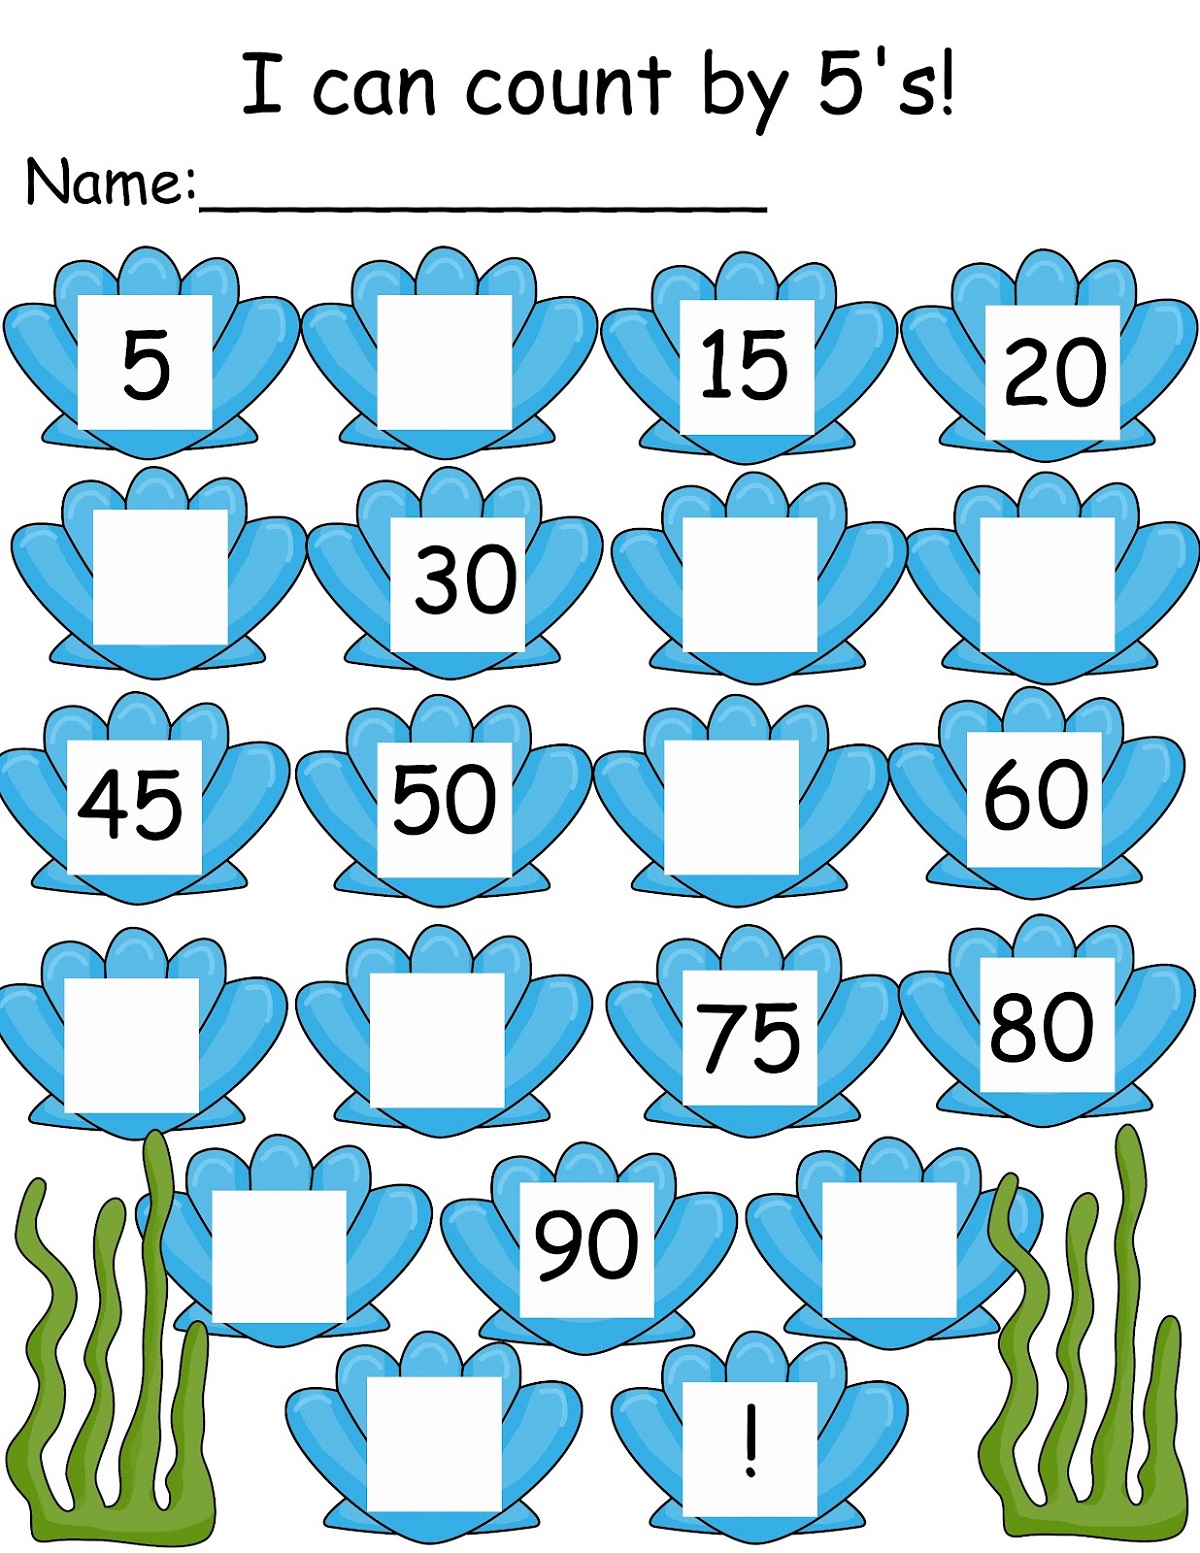 Count By 5s Worksheet For Kids